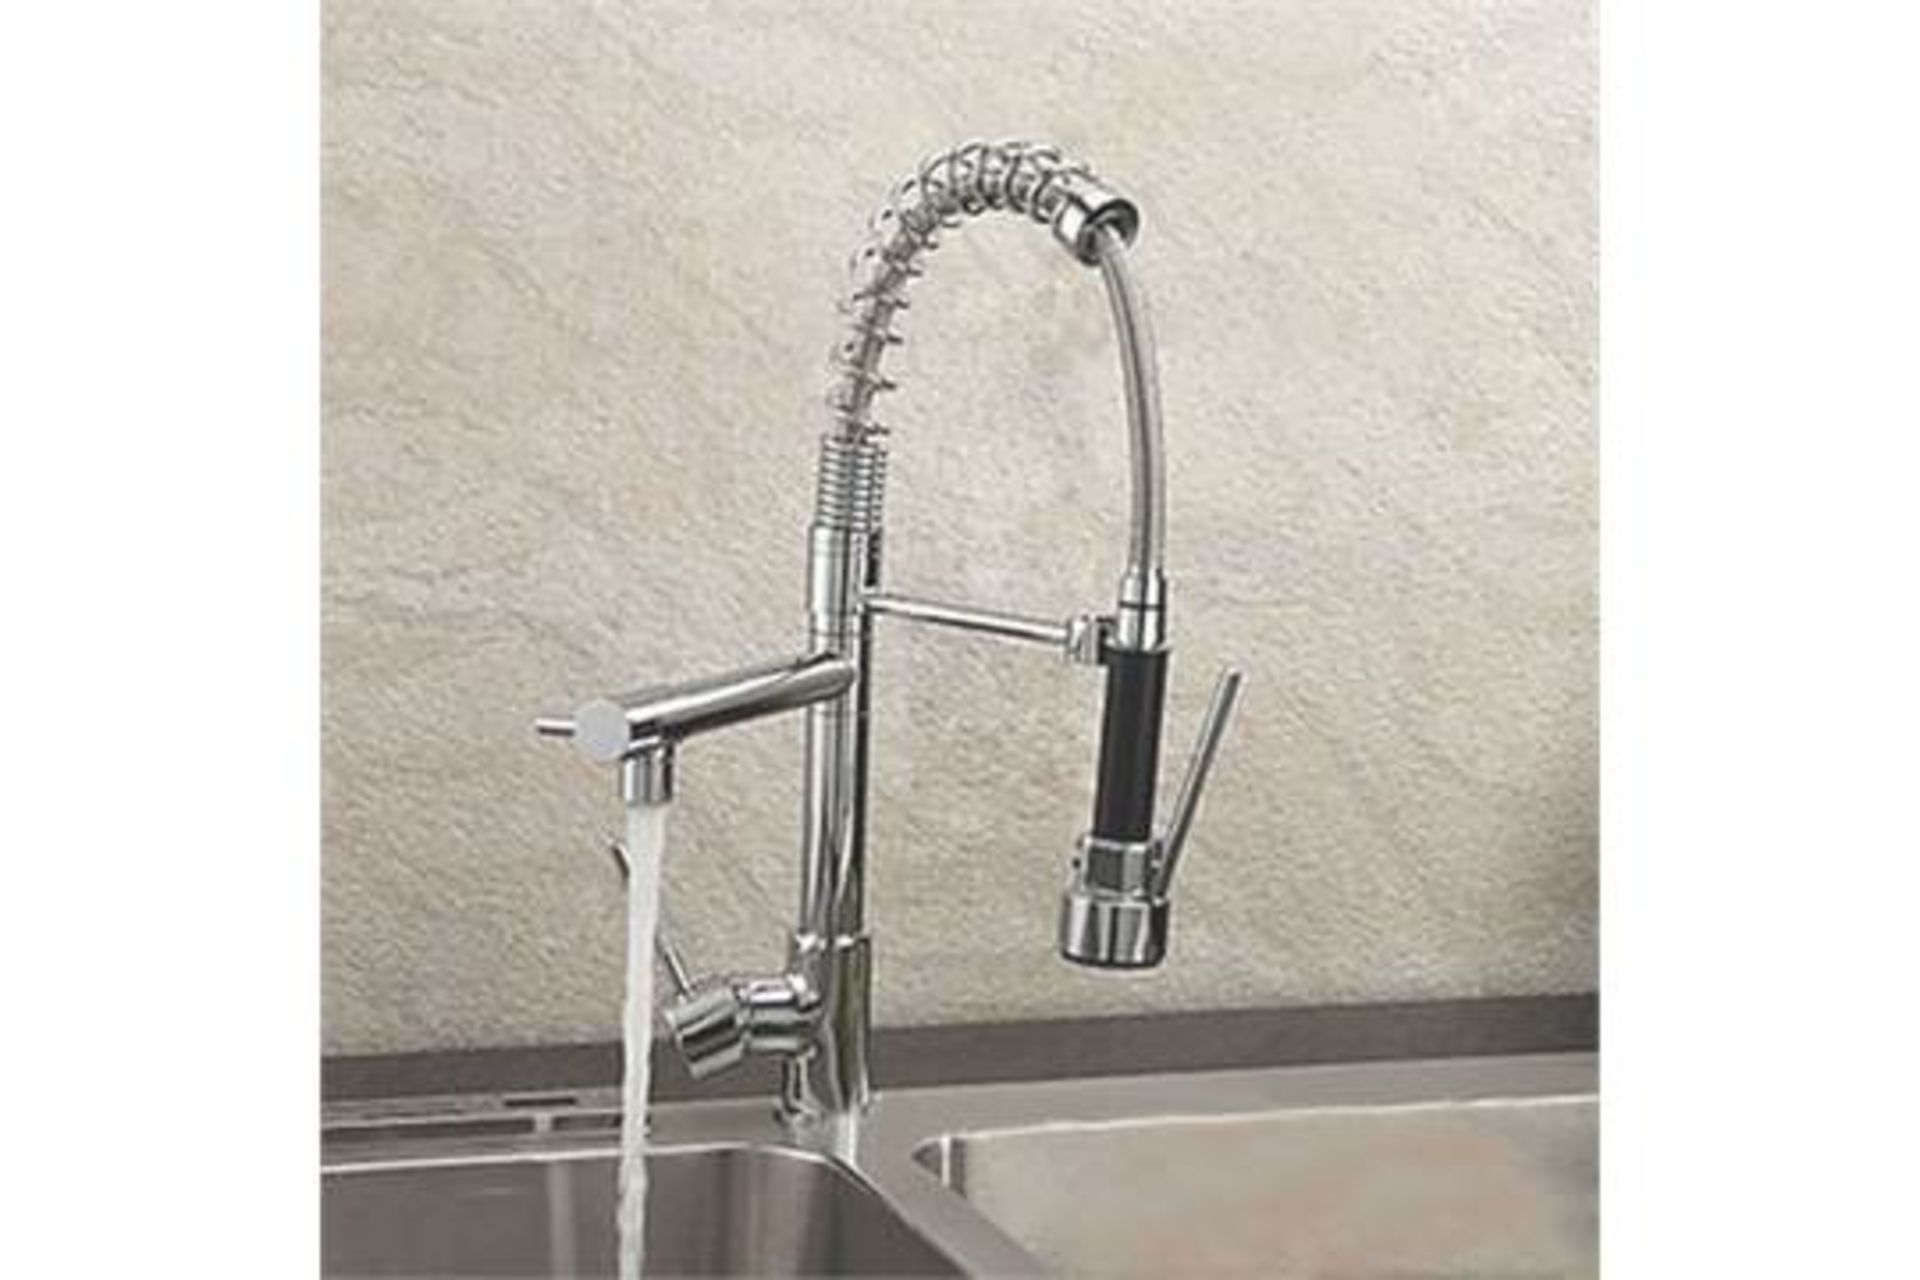 New & Boxed Bentley Modern Monobloc Chrome Brass Pull Out Spray Mixer Tap.RRP £349.99.This Tap Is